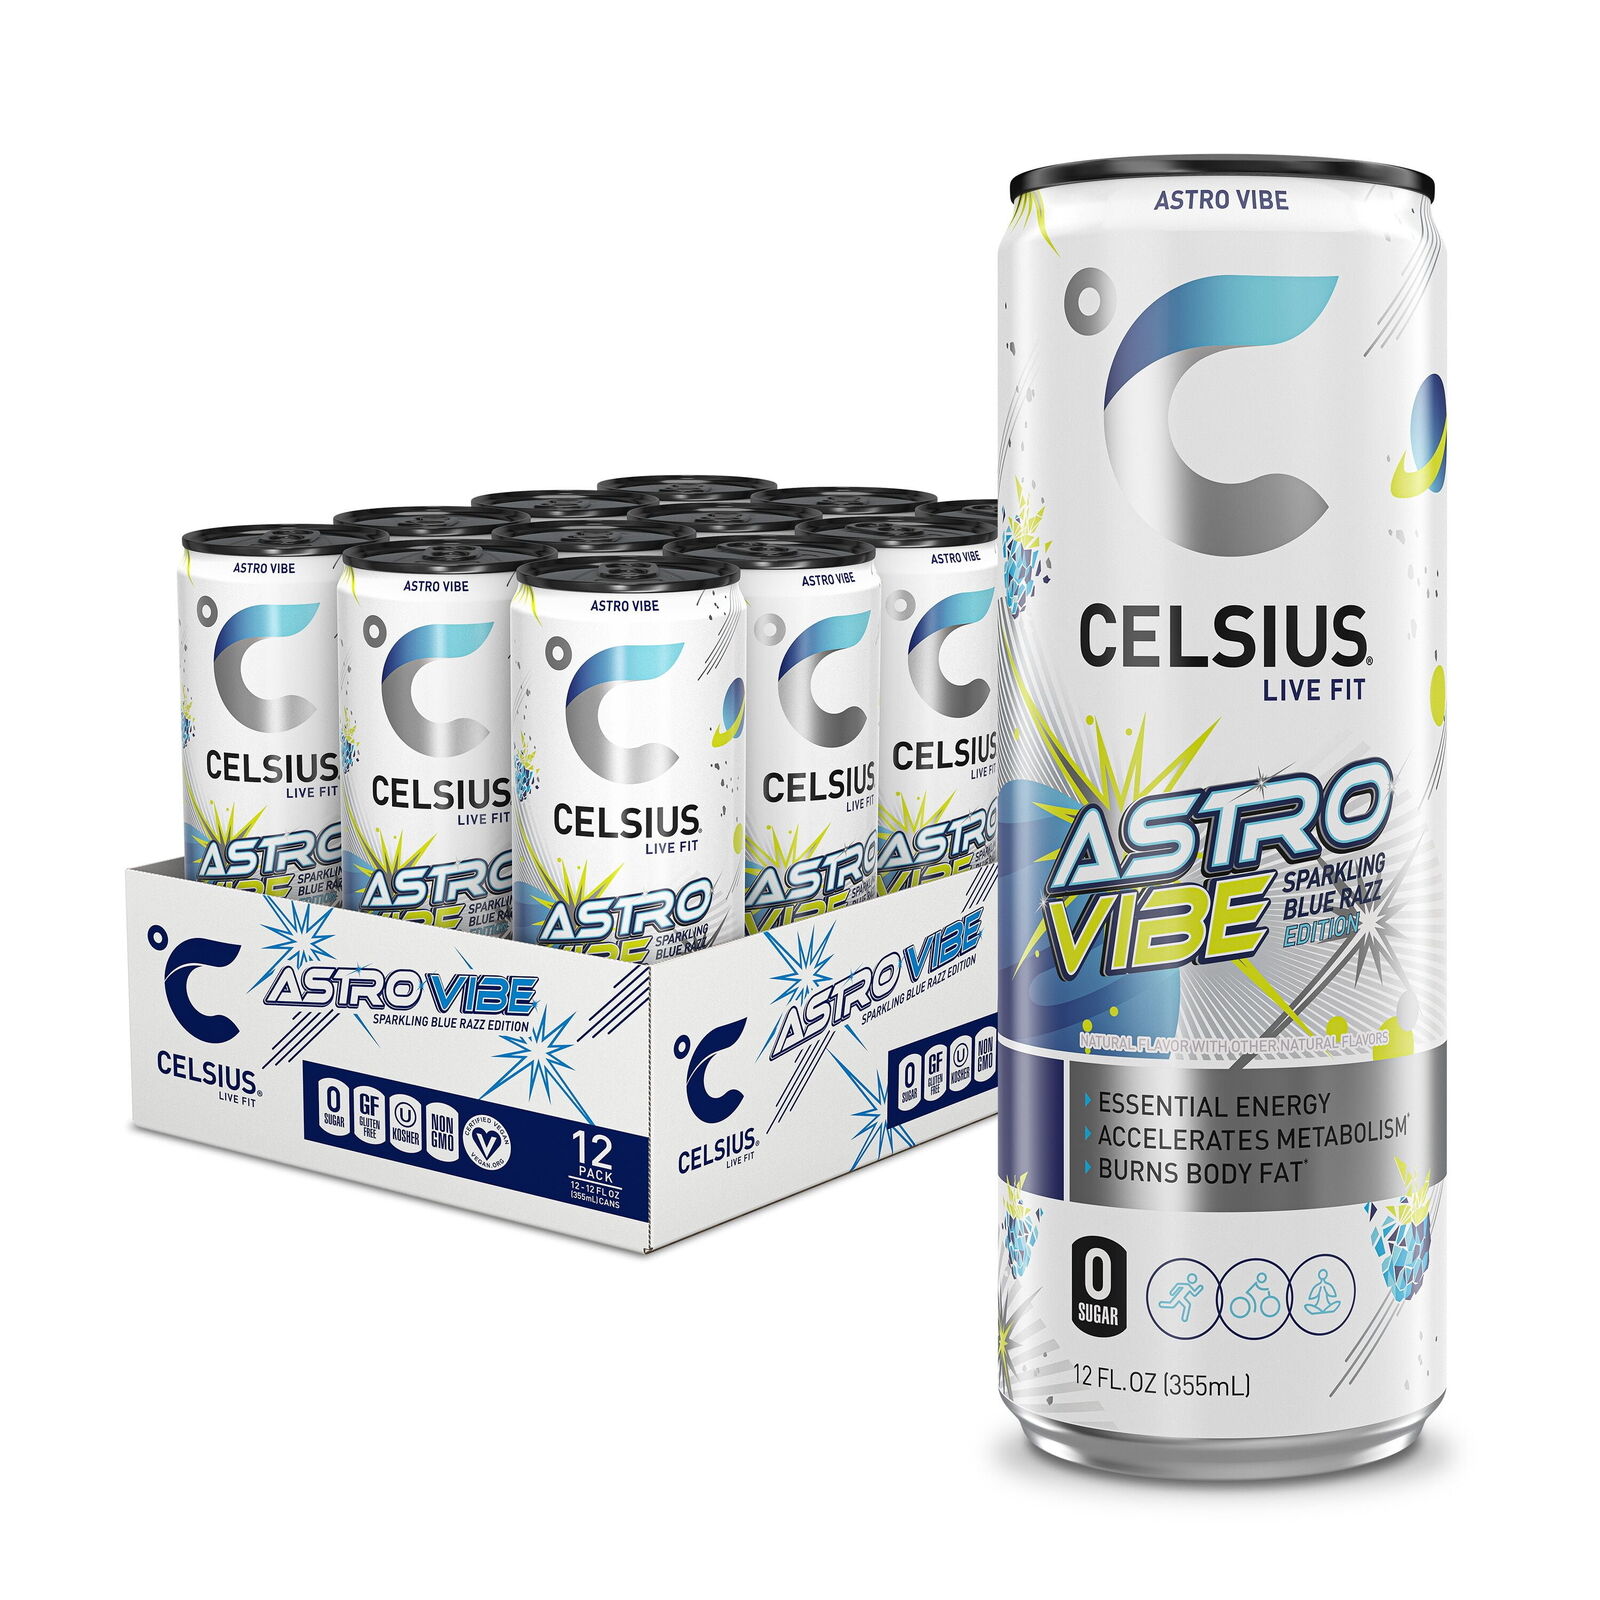 CELSIUS Sparkling Astro Vibe, Functional Essential Energy Drink 12 fl oz Can